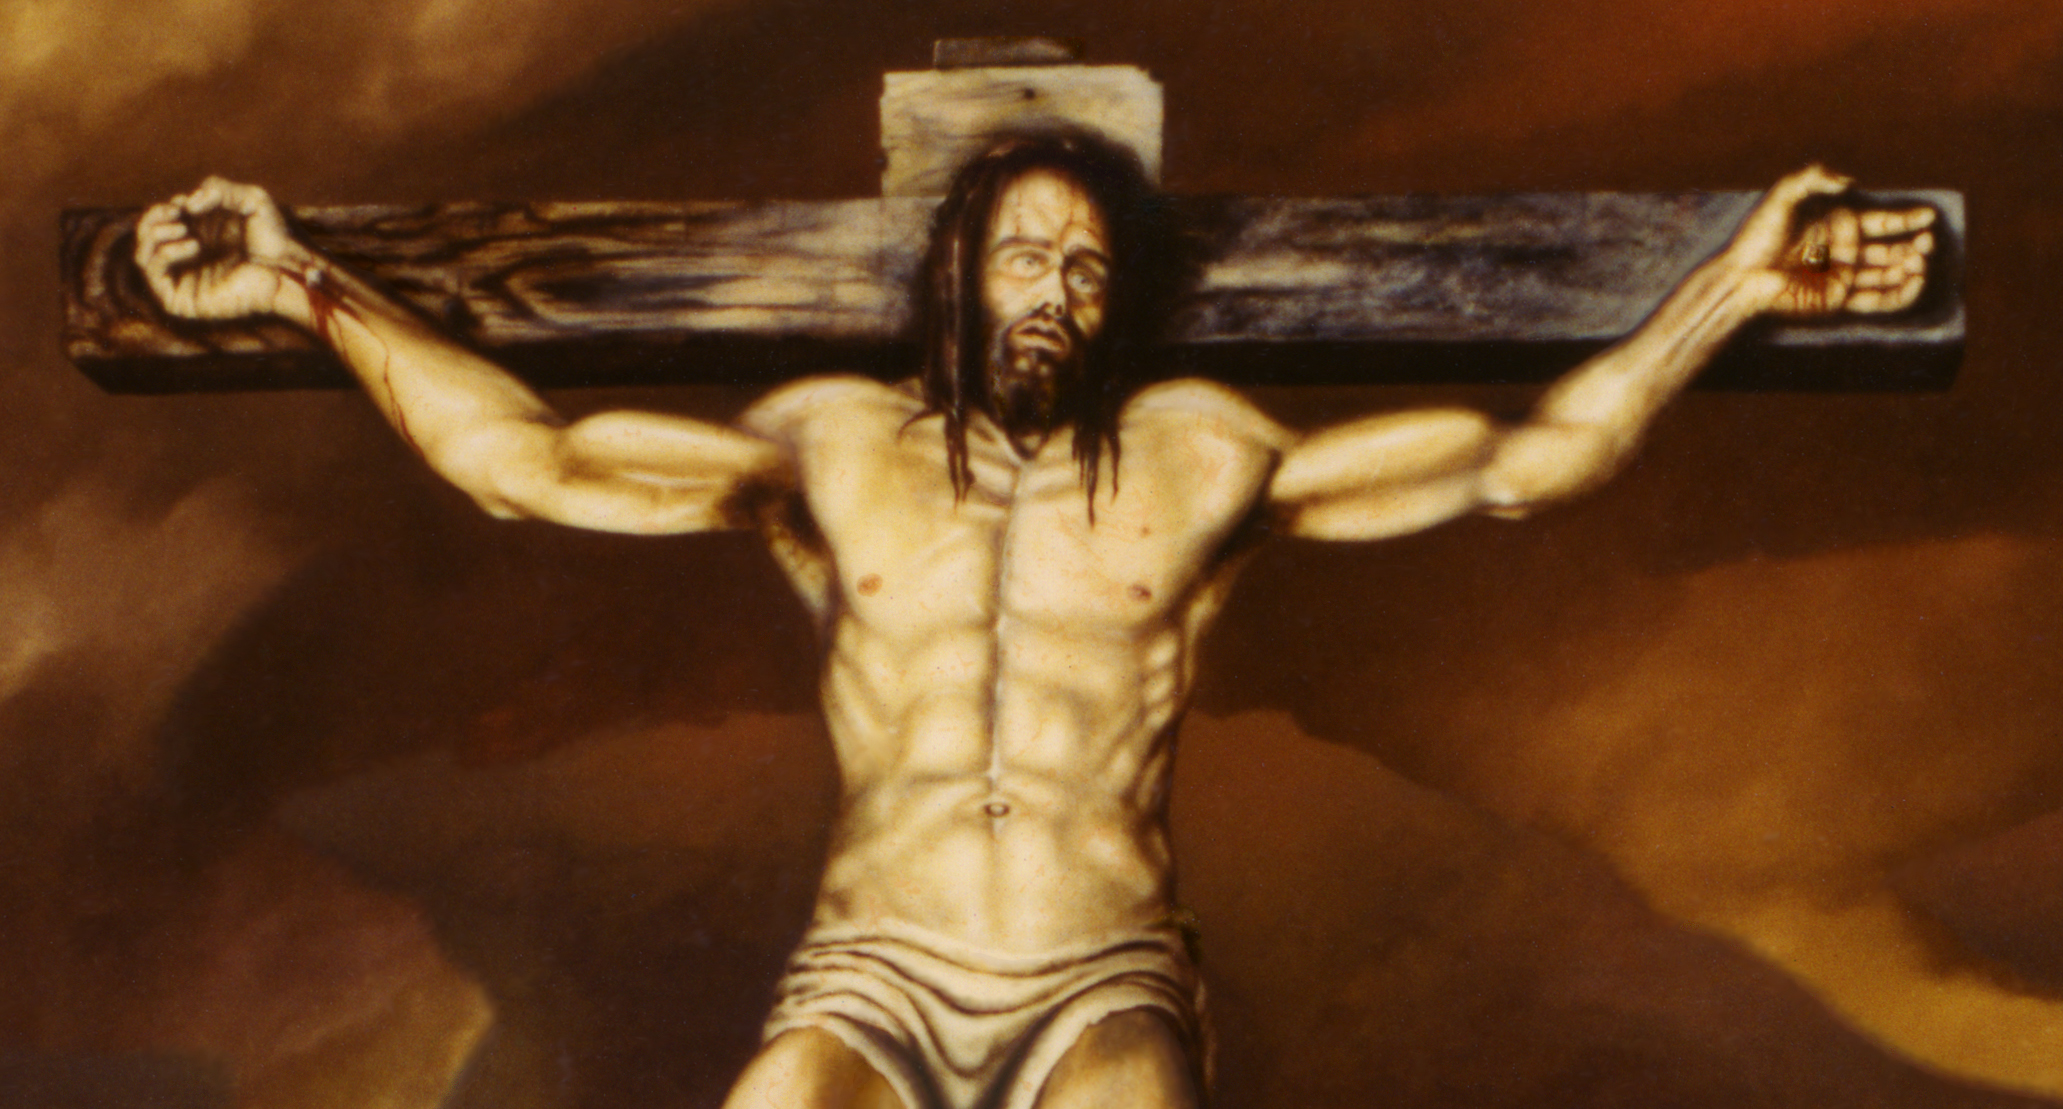 1970 – G. Mark Mulleian’s Crucifixion